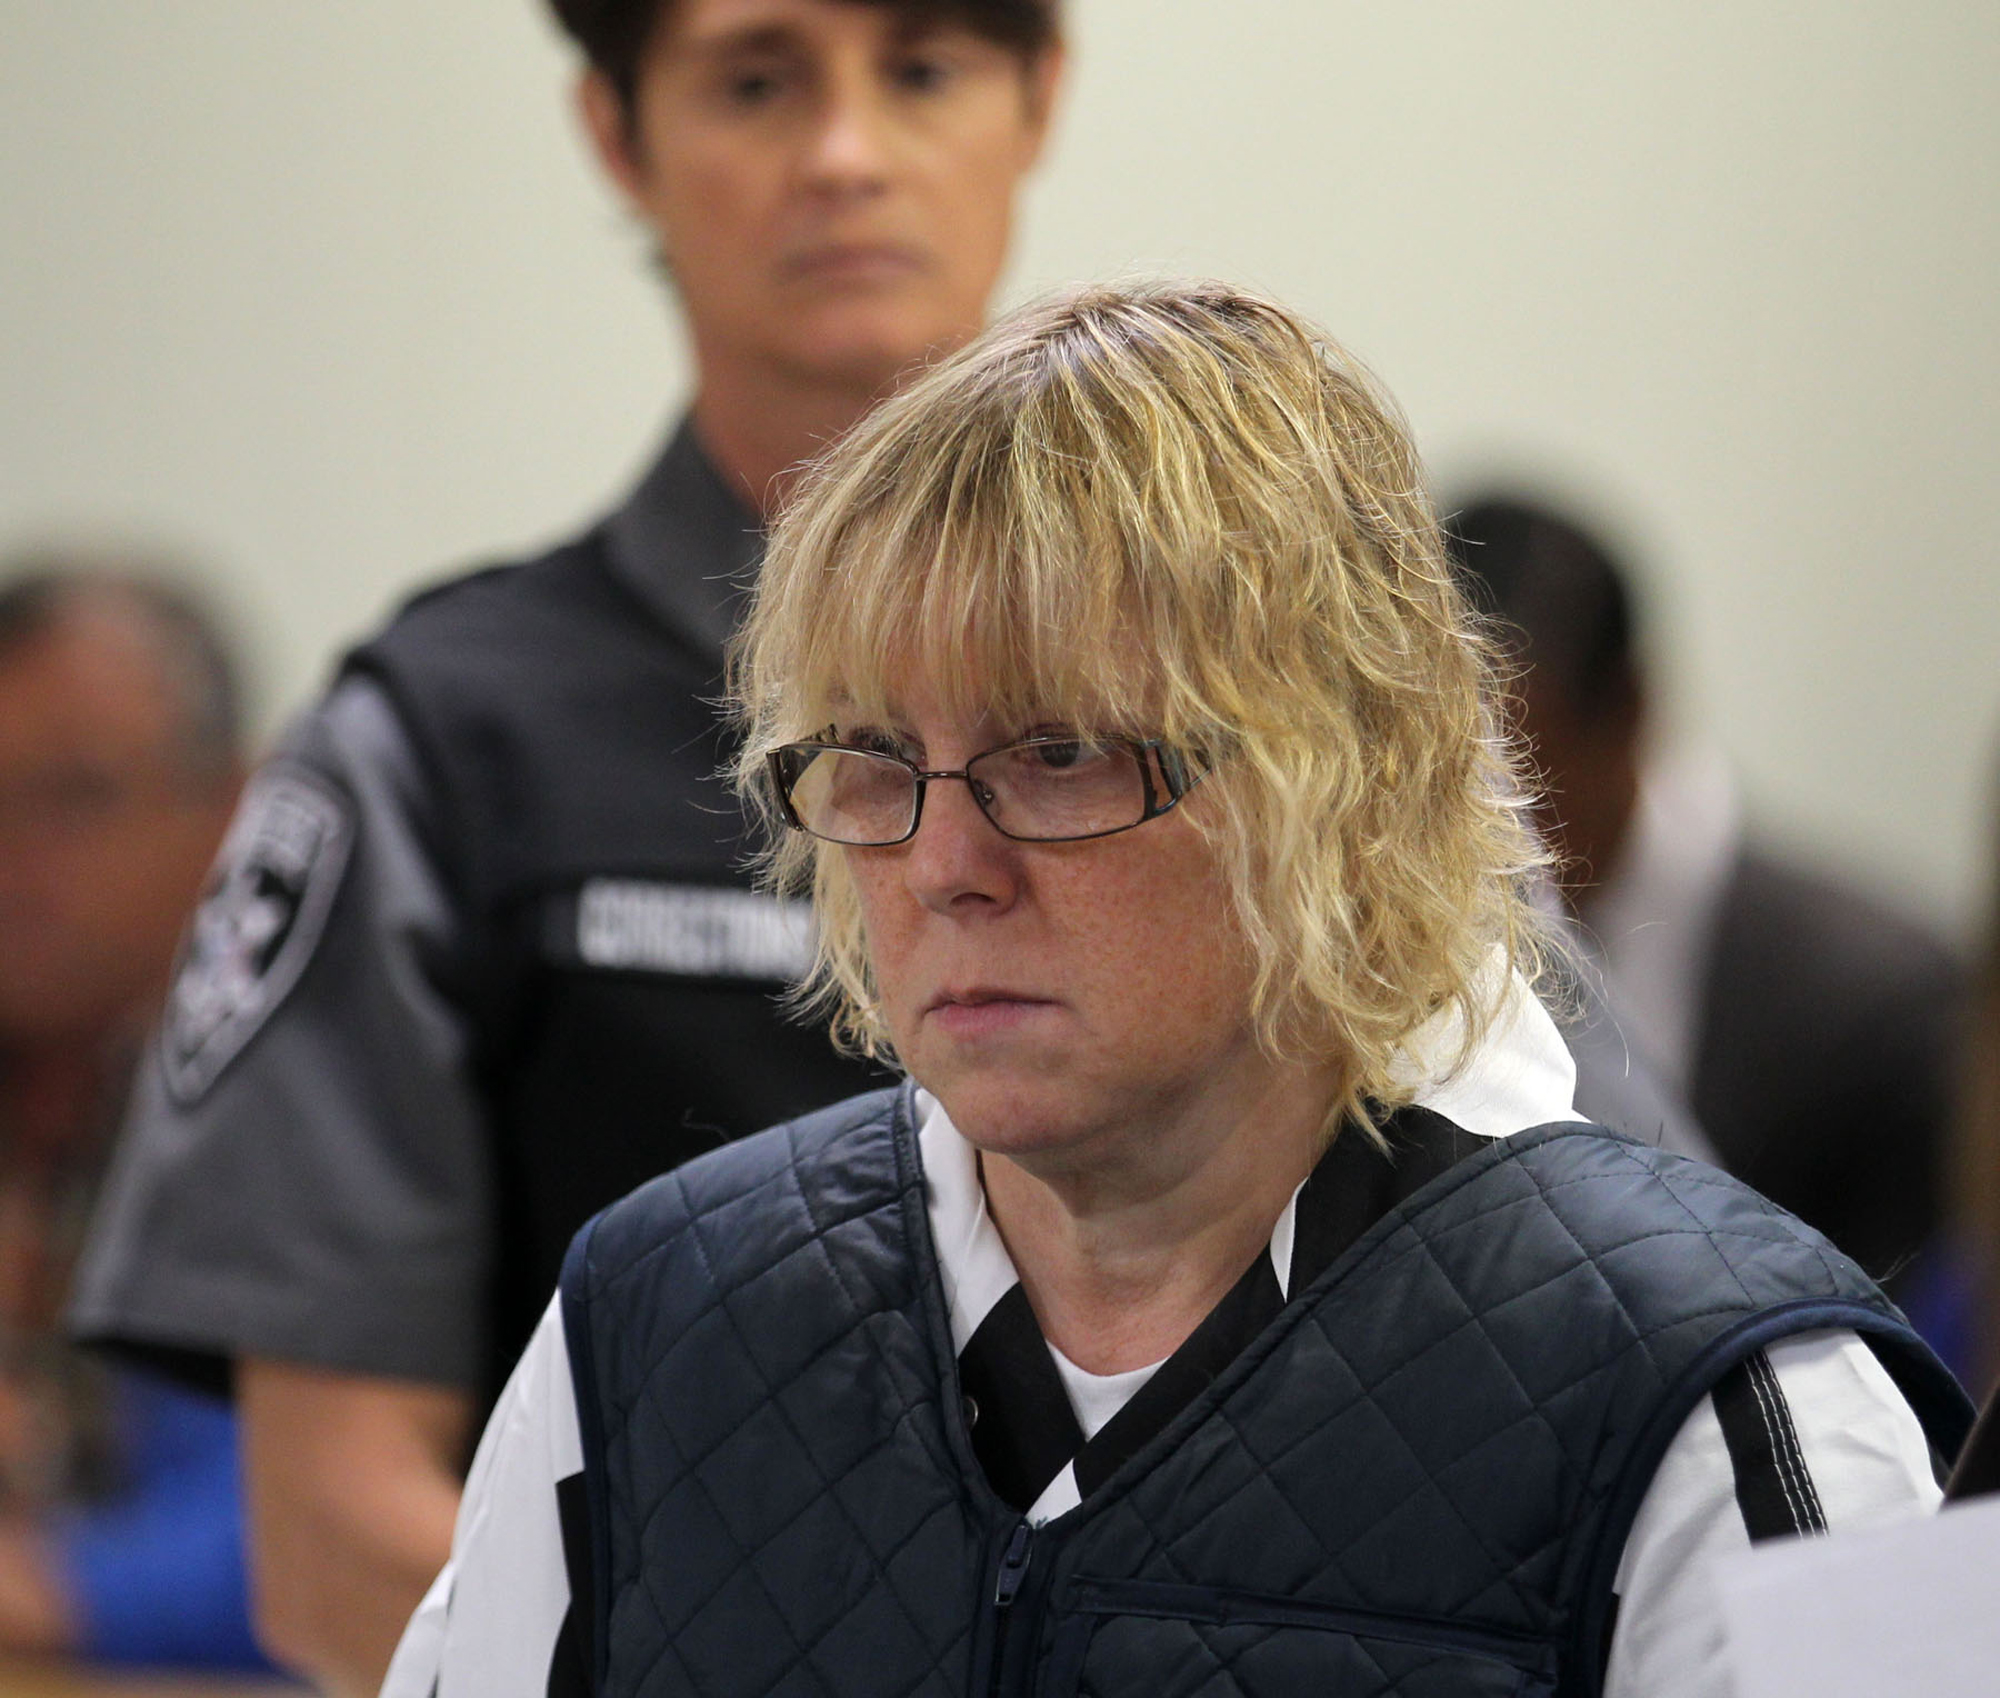 PHOTO: Joyce Mitchell appears before Judge Mark Rogers in City Court in this file photo, June 15, 2015, in Plattsburgh, N.Y.